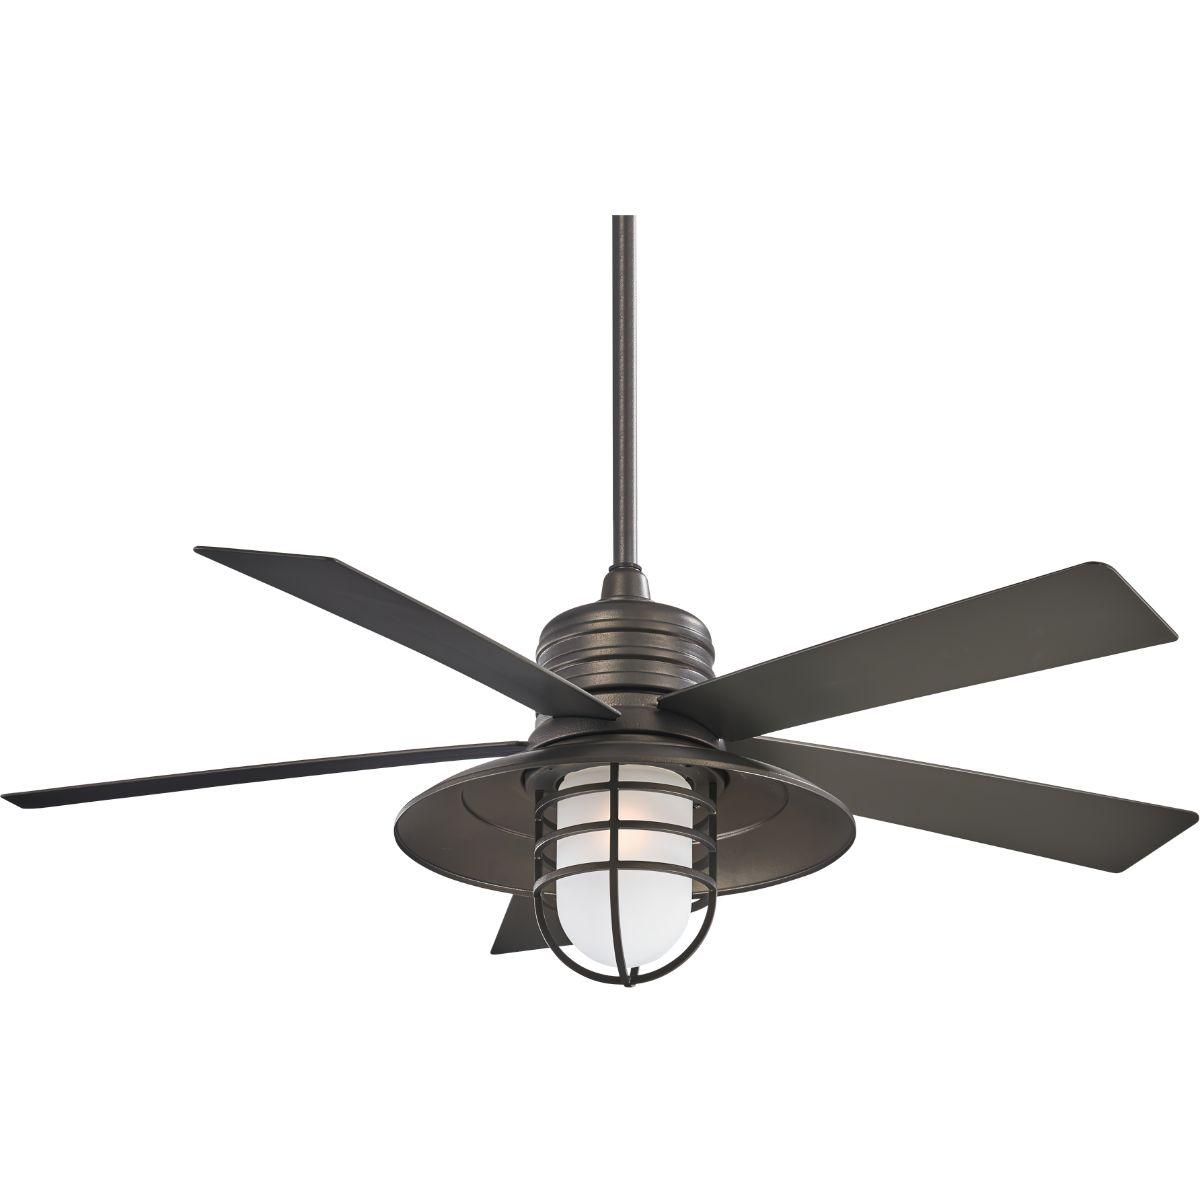 Rainman 54 Inch Contemporary Outdoor Ceiling Fan With Light, Wall Control Included - Bees Lighting